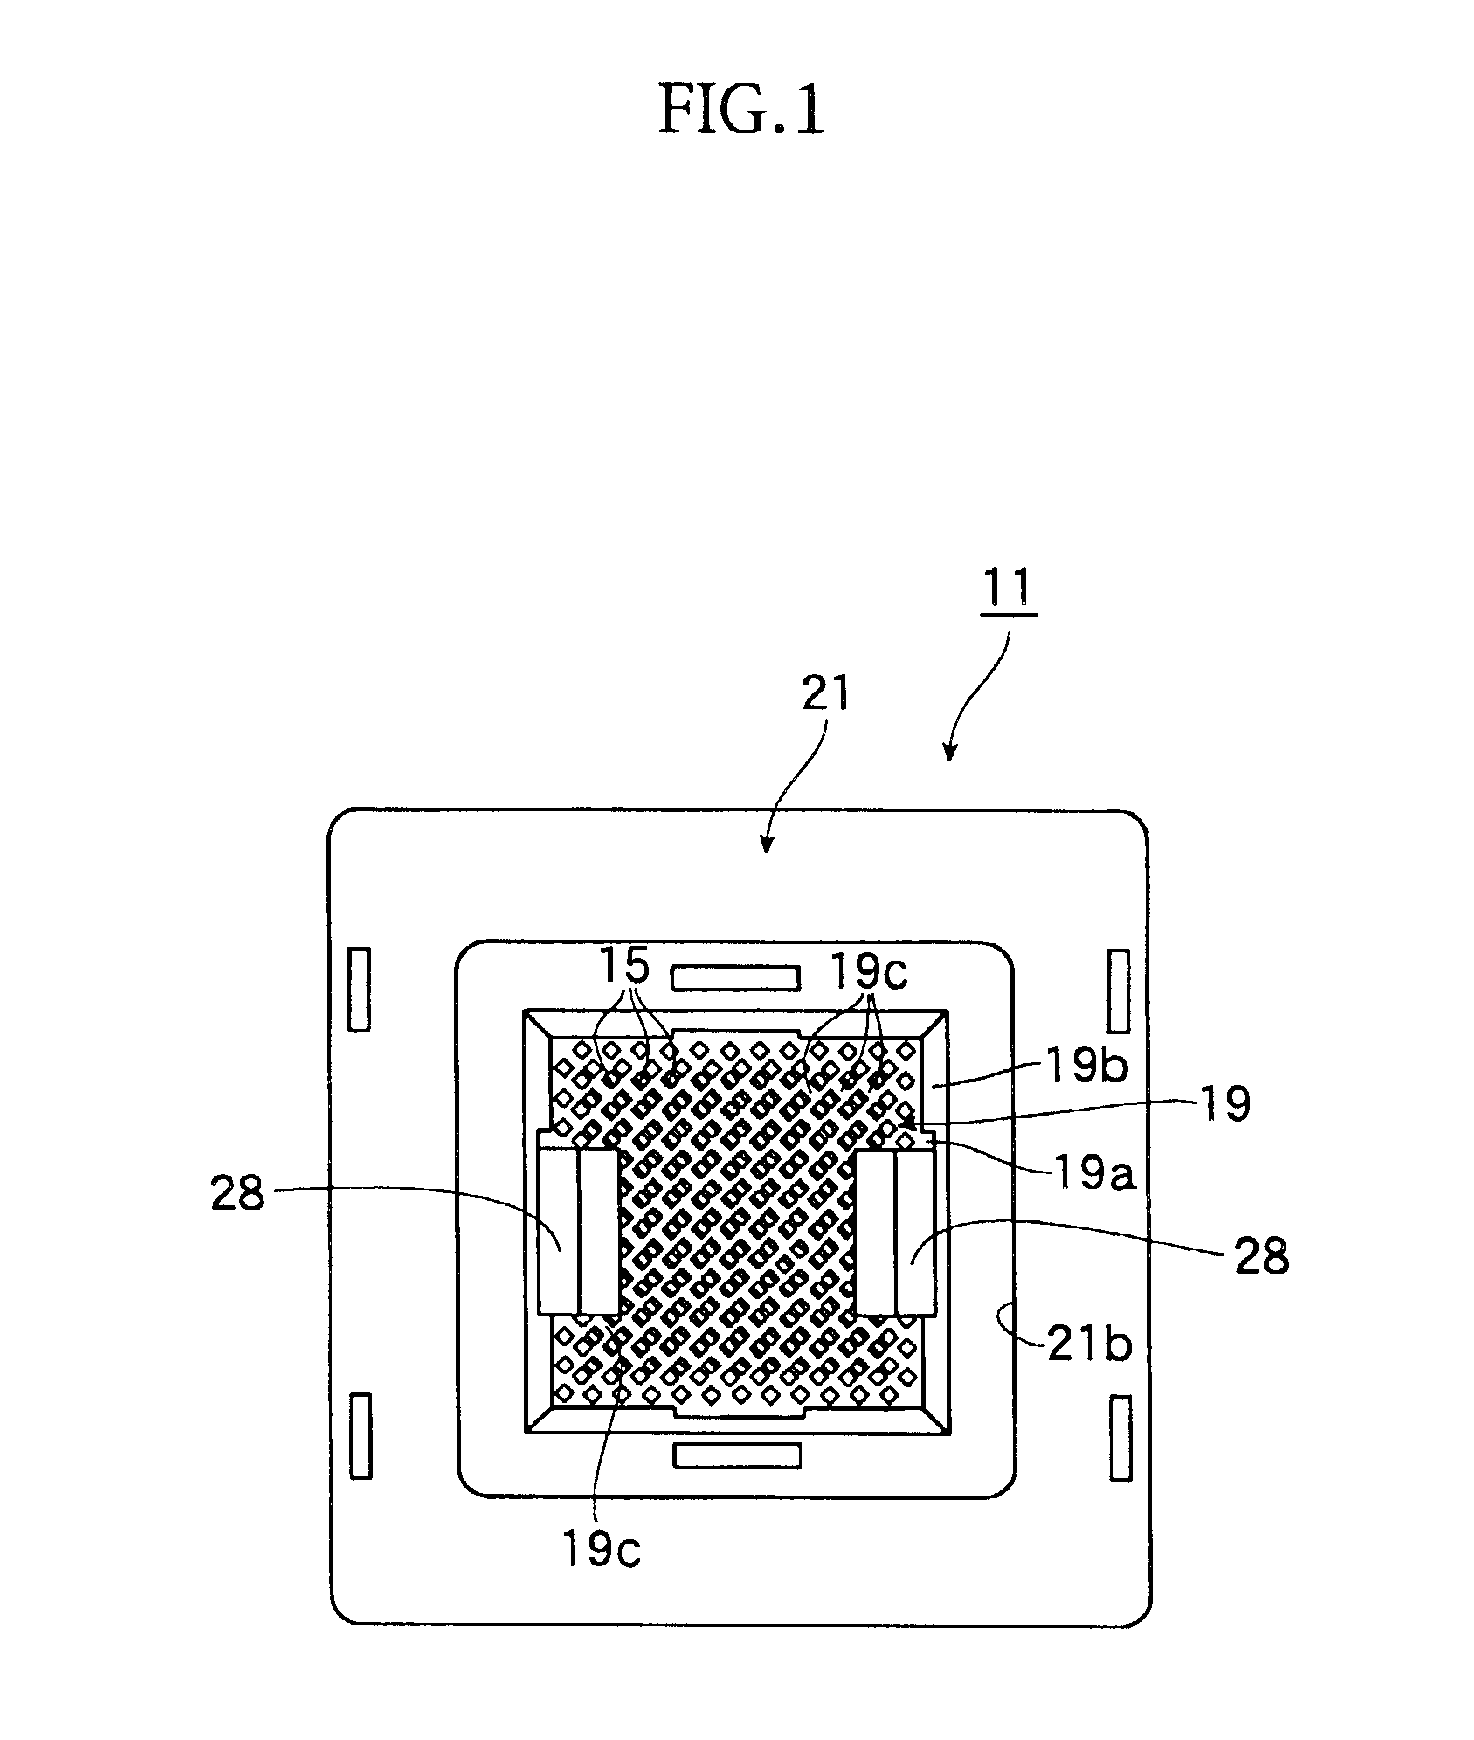 Socket for electrical parts